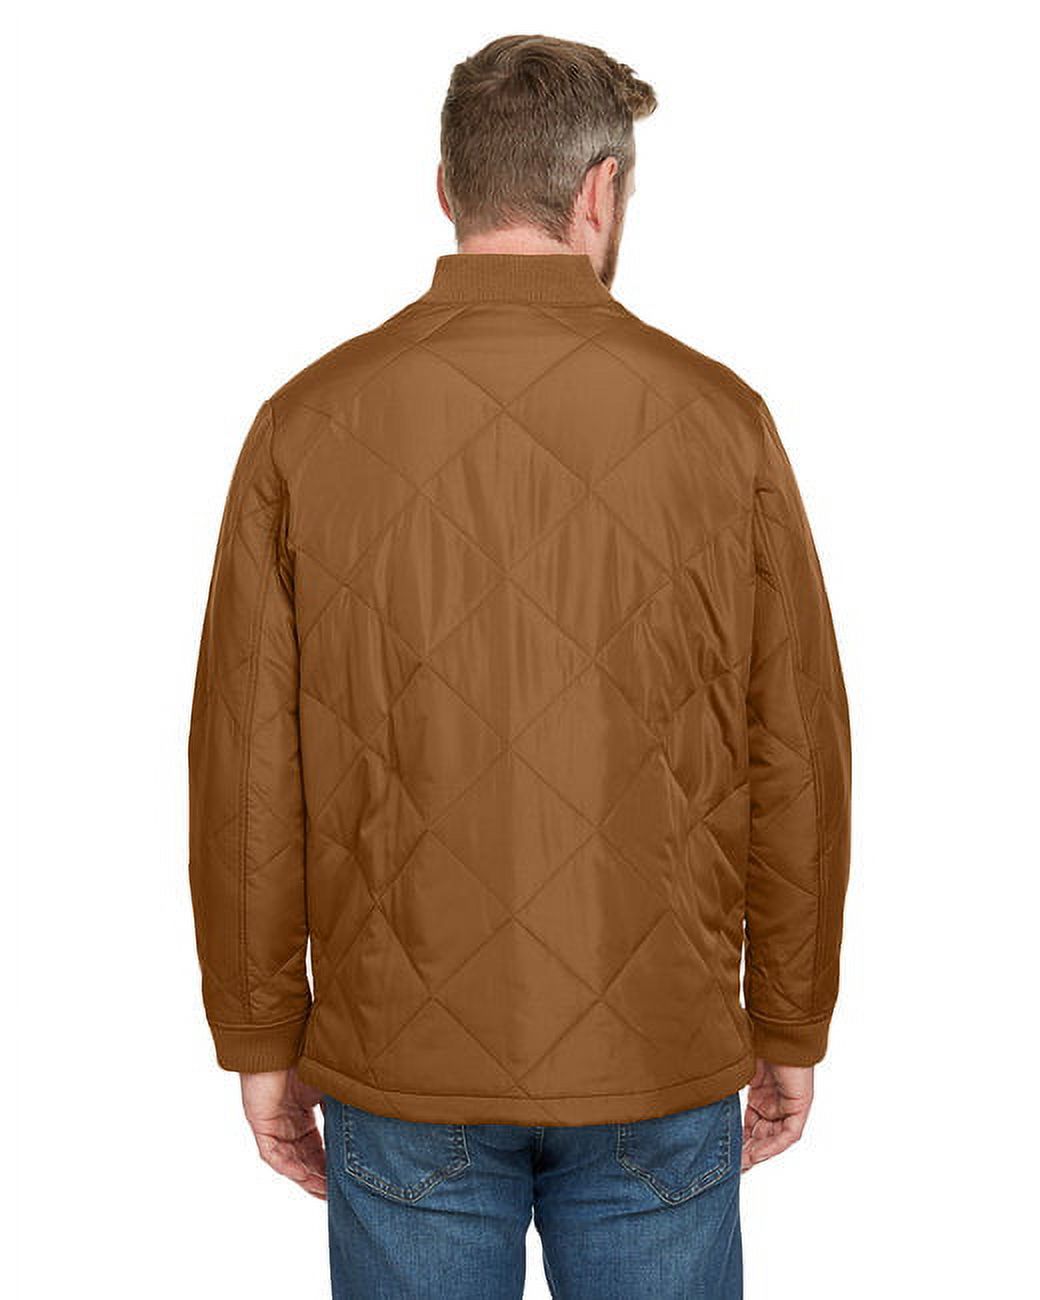 Adult Dockside Insulated Utility Jacket - DUCK BROWN - 4XL - image 2 of 3